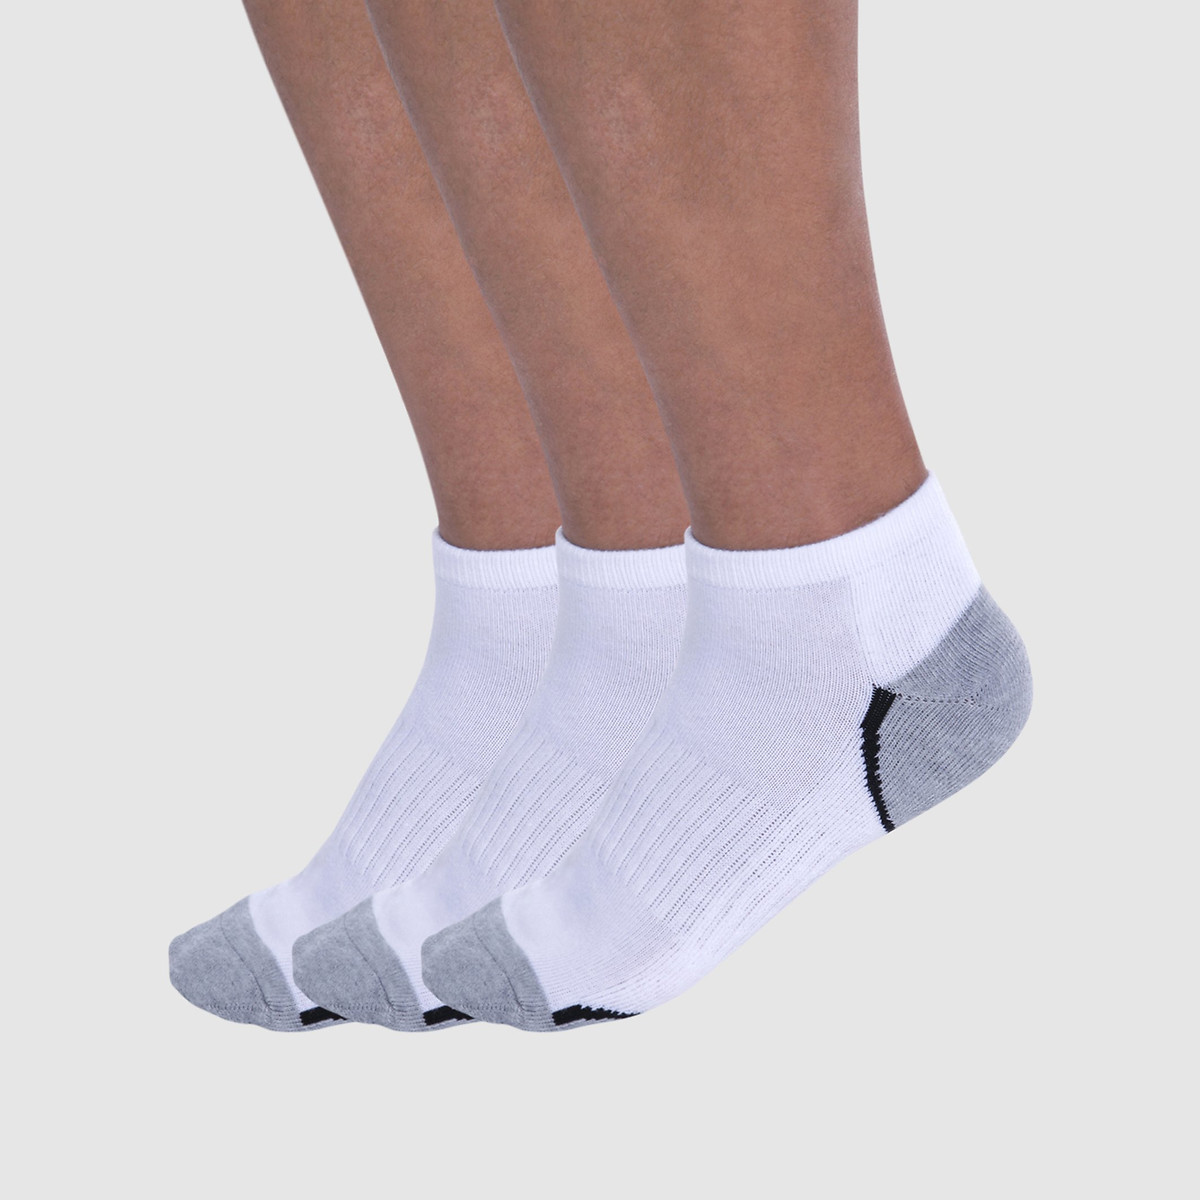 Image of Pack of 3 Pairs of Sports Socks